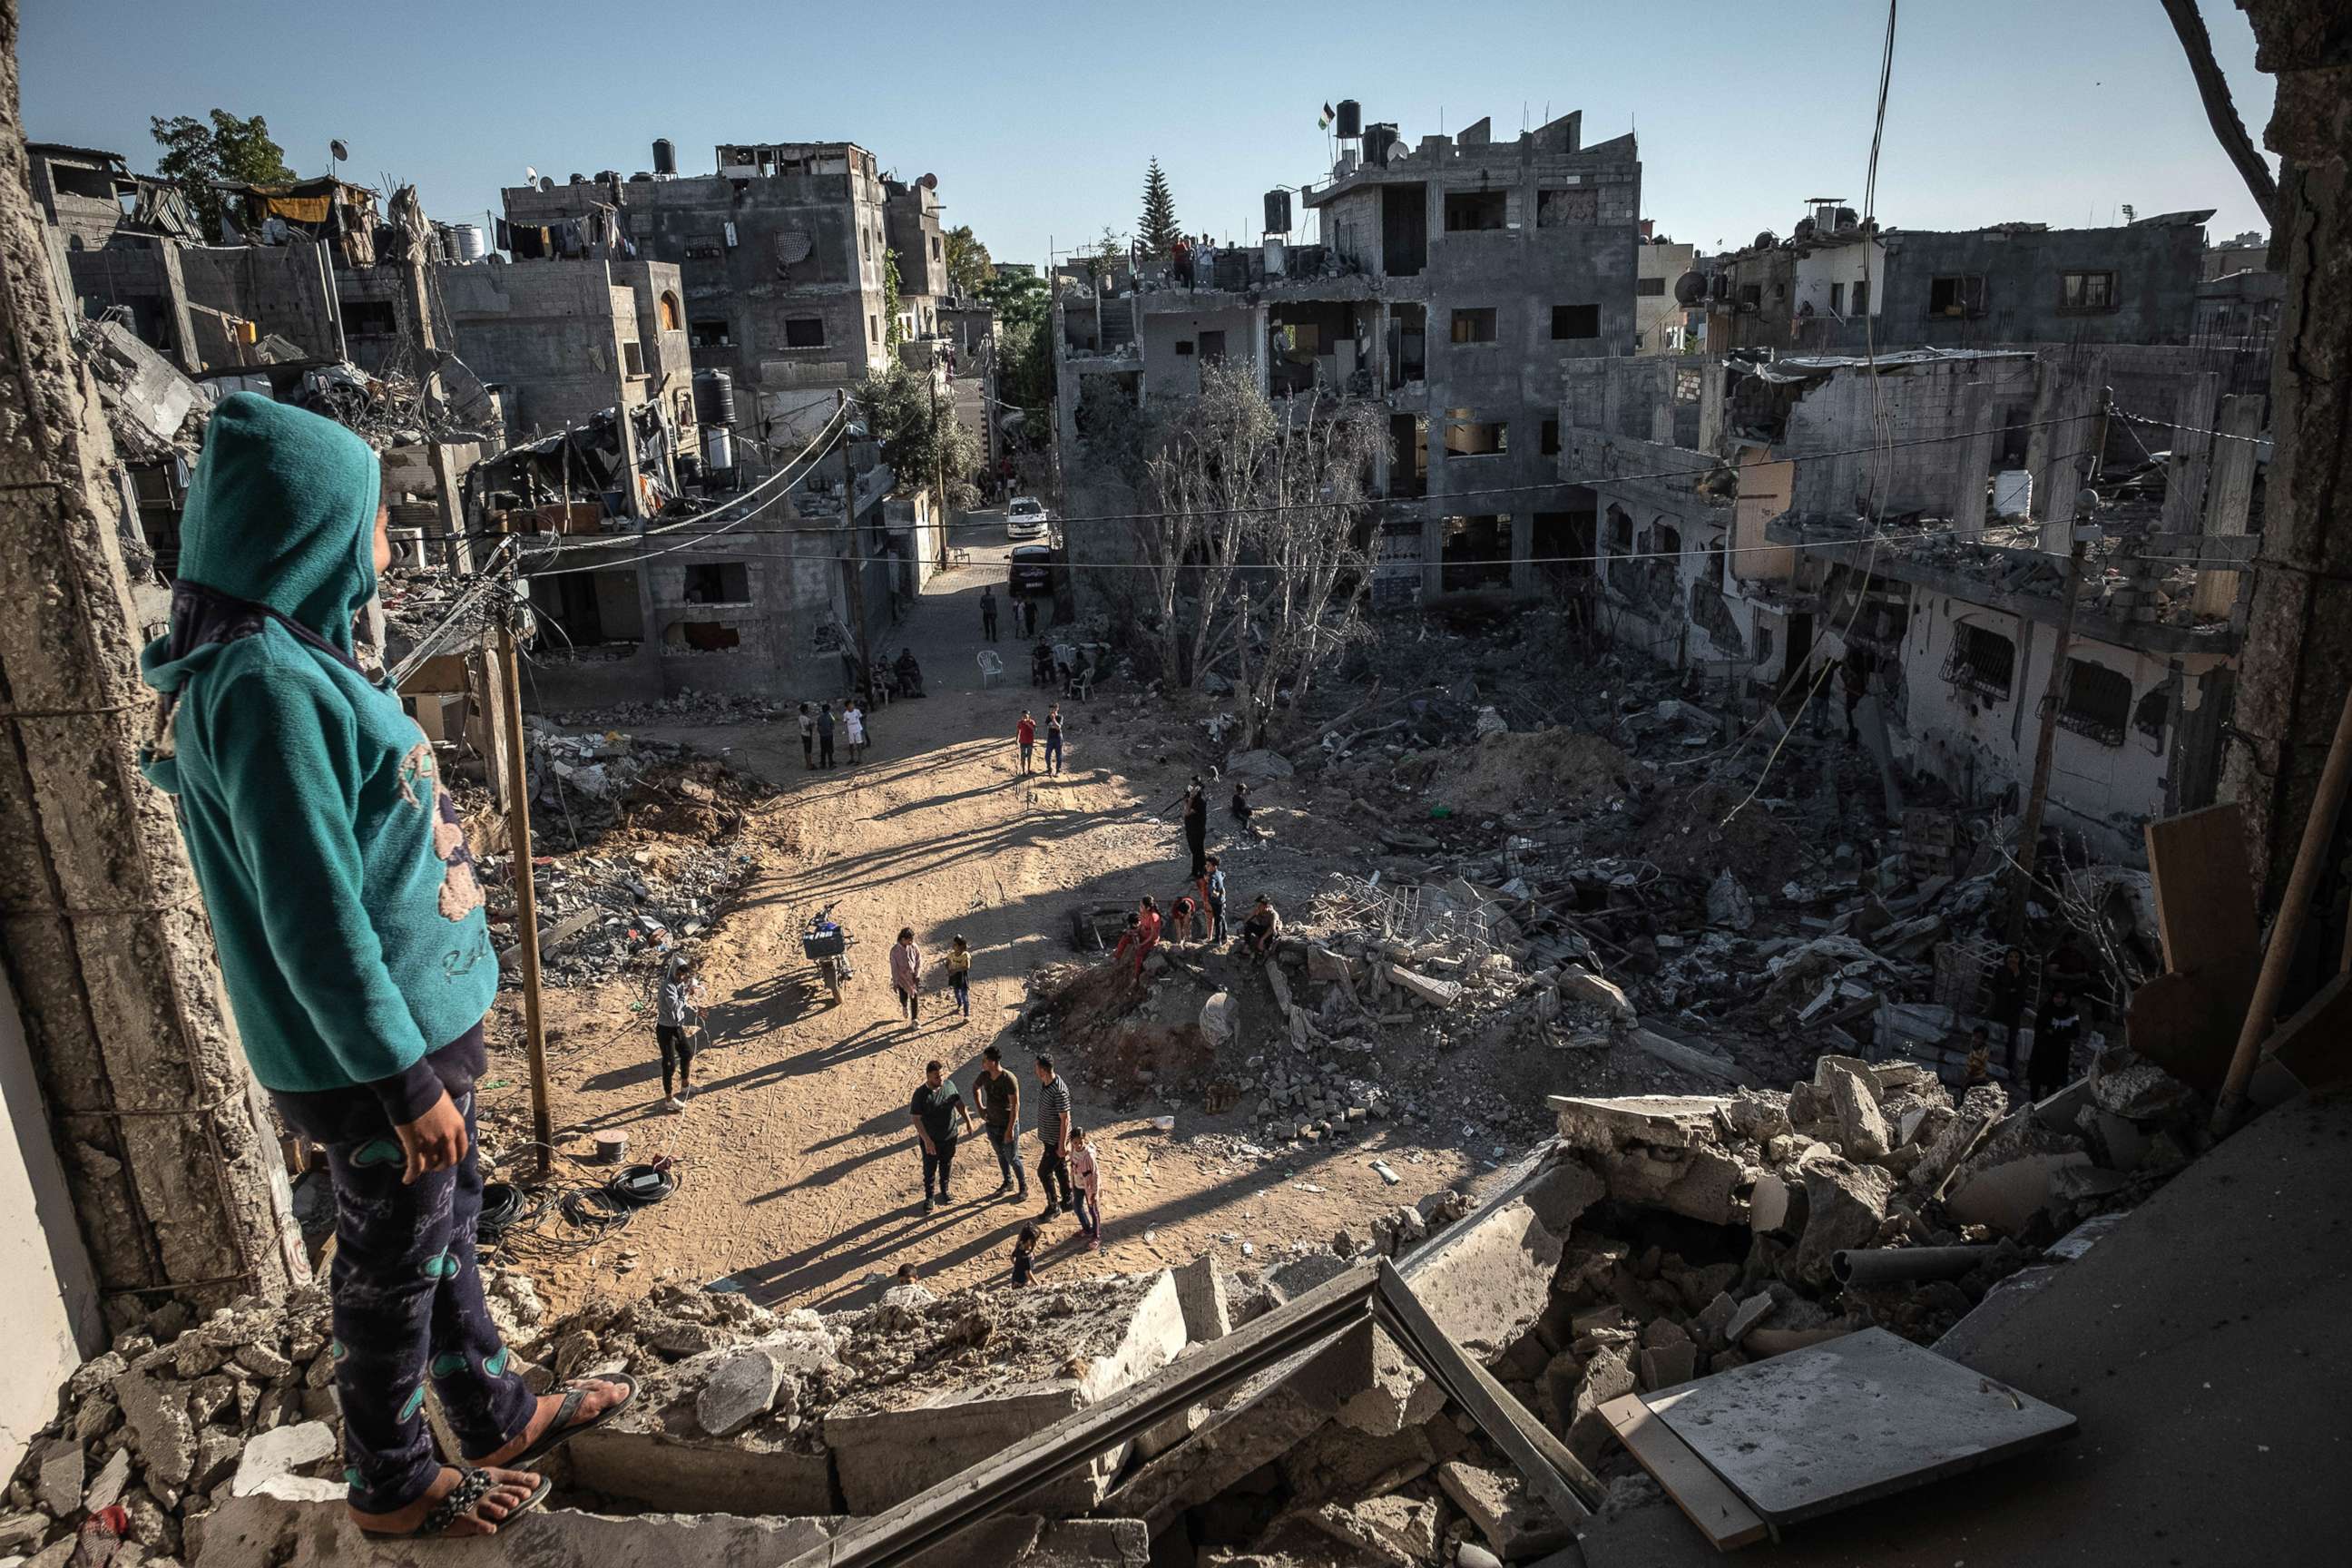 PHOTO: Palestinians return to the rubble of their destroyed homesin Beit Hanoun, Gaza, four days after the ceasefire between Israel and Hamas, May 24, 2021.